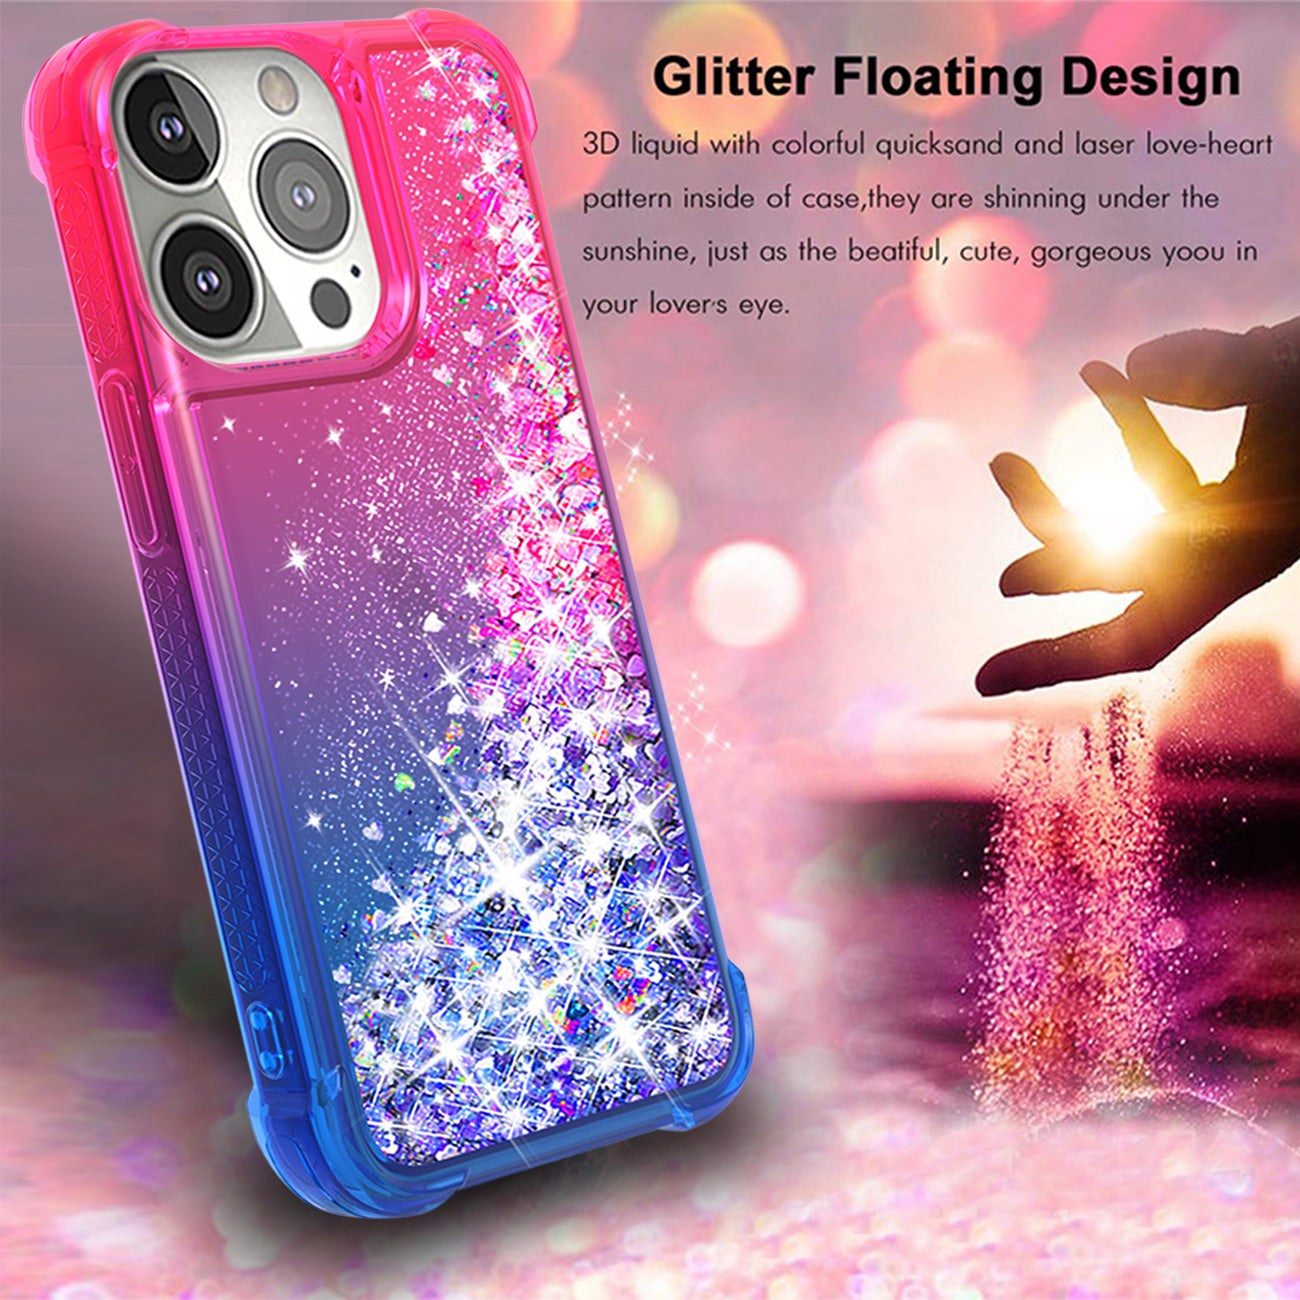 Shiny Flowing Glitter Liquid Bumper Case For APPLE IPHONE 13 PRO MAX In Pink